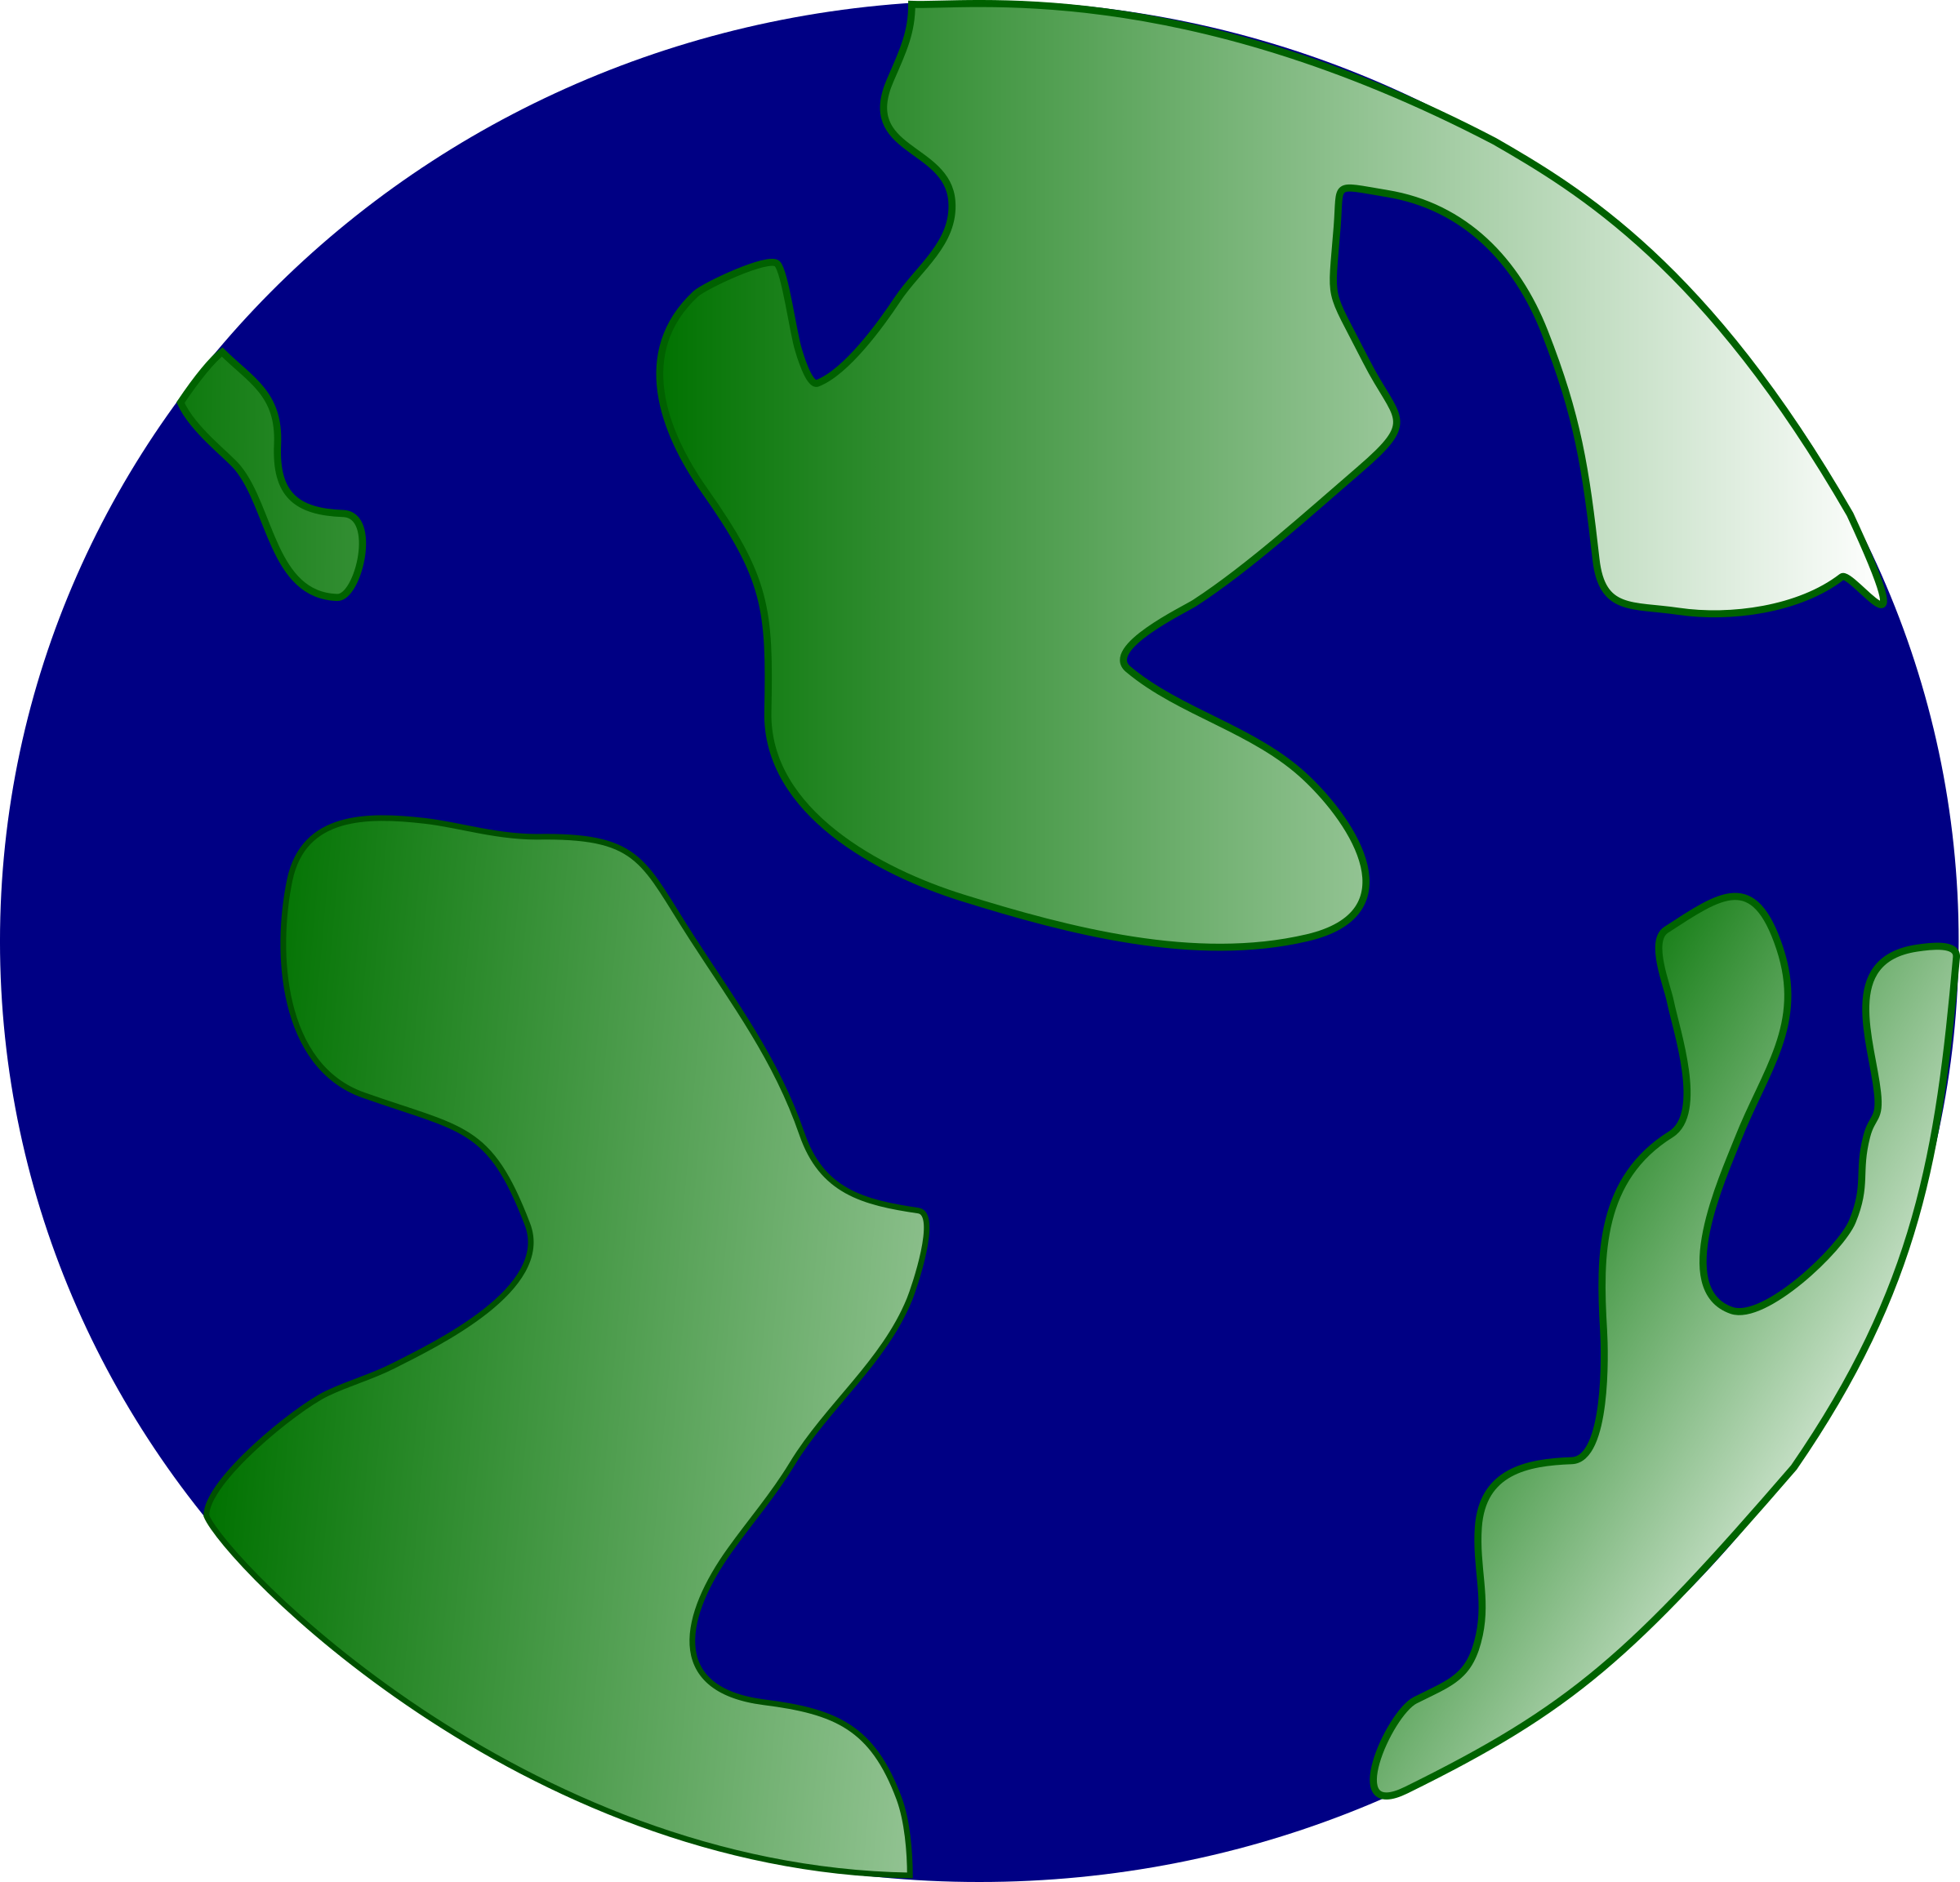 Globe clipart geography, Globe geography Transparent FREE